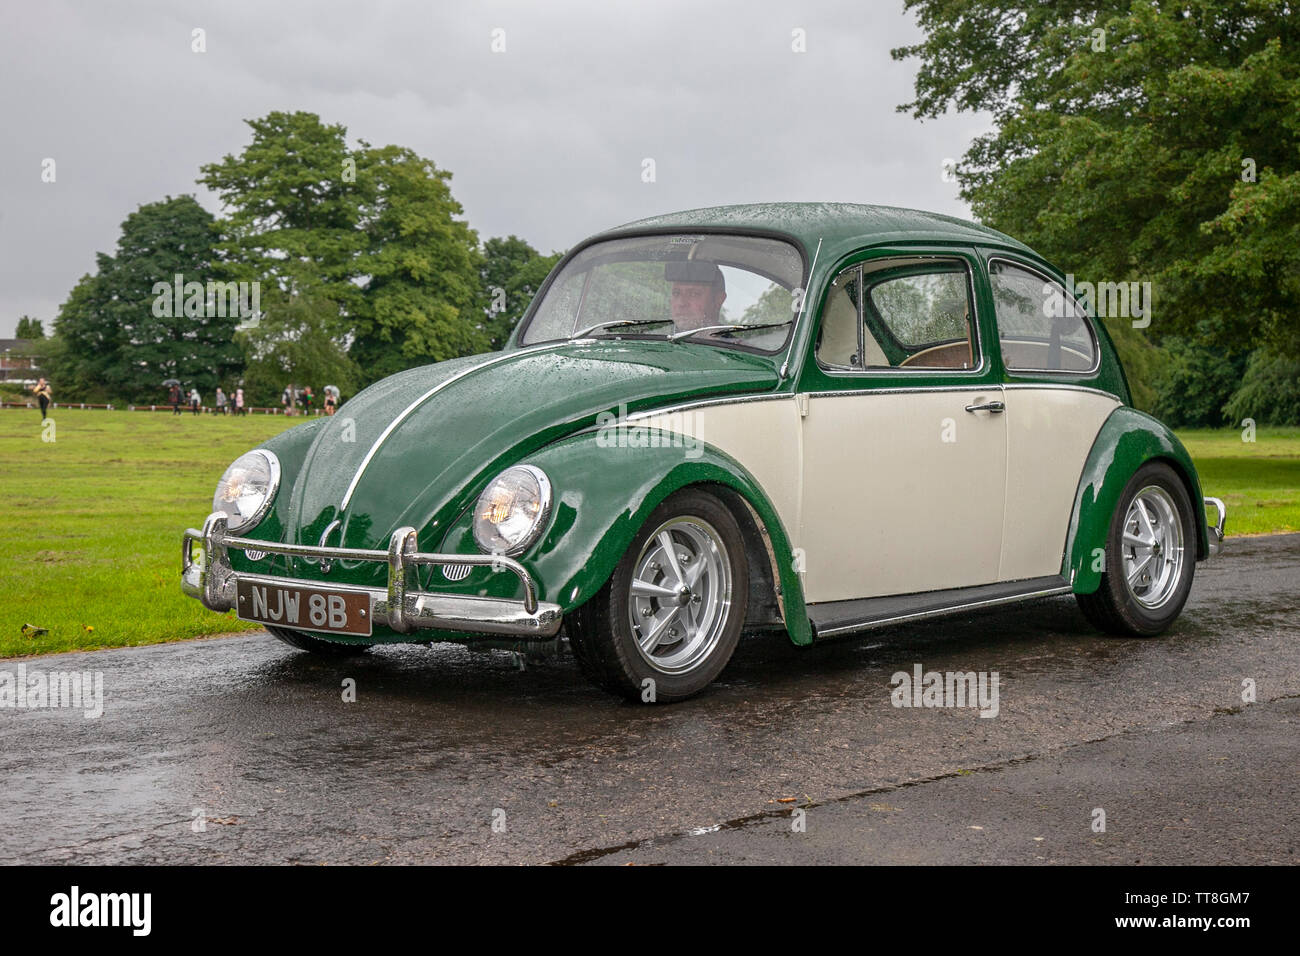 1971 70s green white old style VW Volkswagen 1500; Popular vintage VW, old vw style Volkswagen 1300 Beetle, classic collectible veteran super cars, classics at Leyland Summer festival. Stock Photo